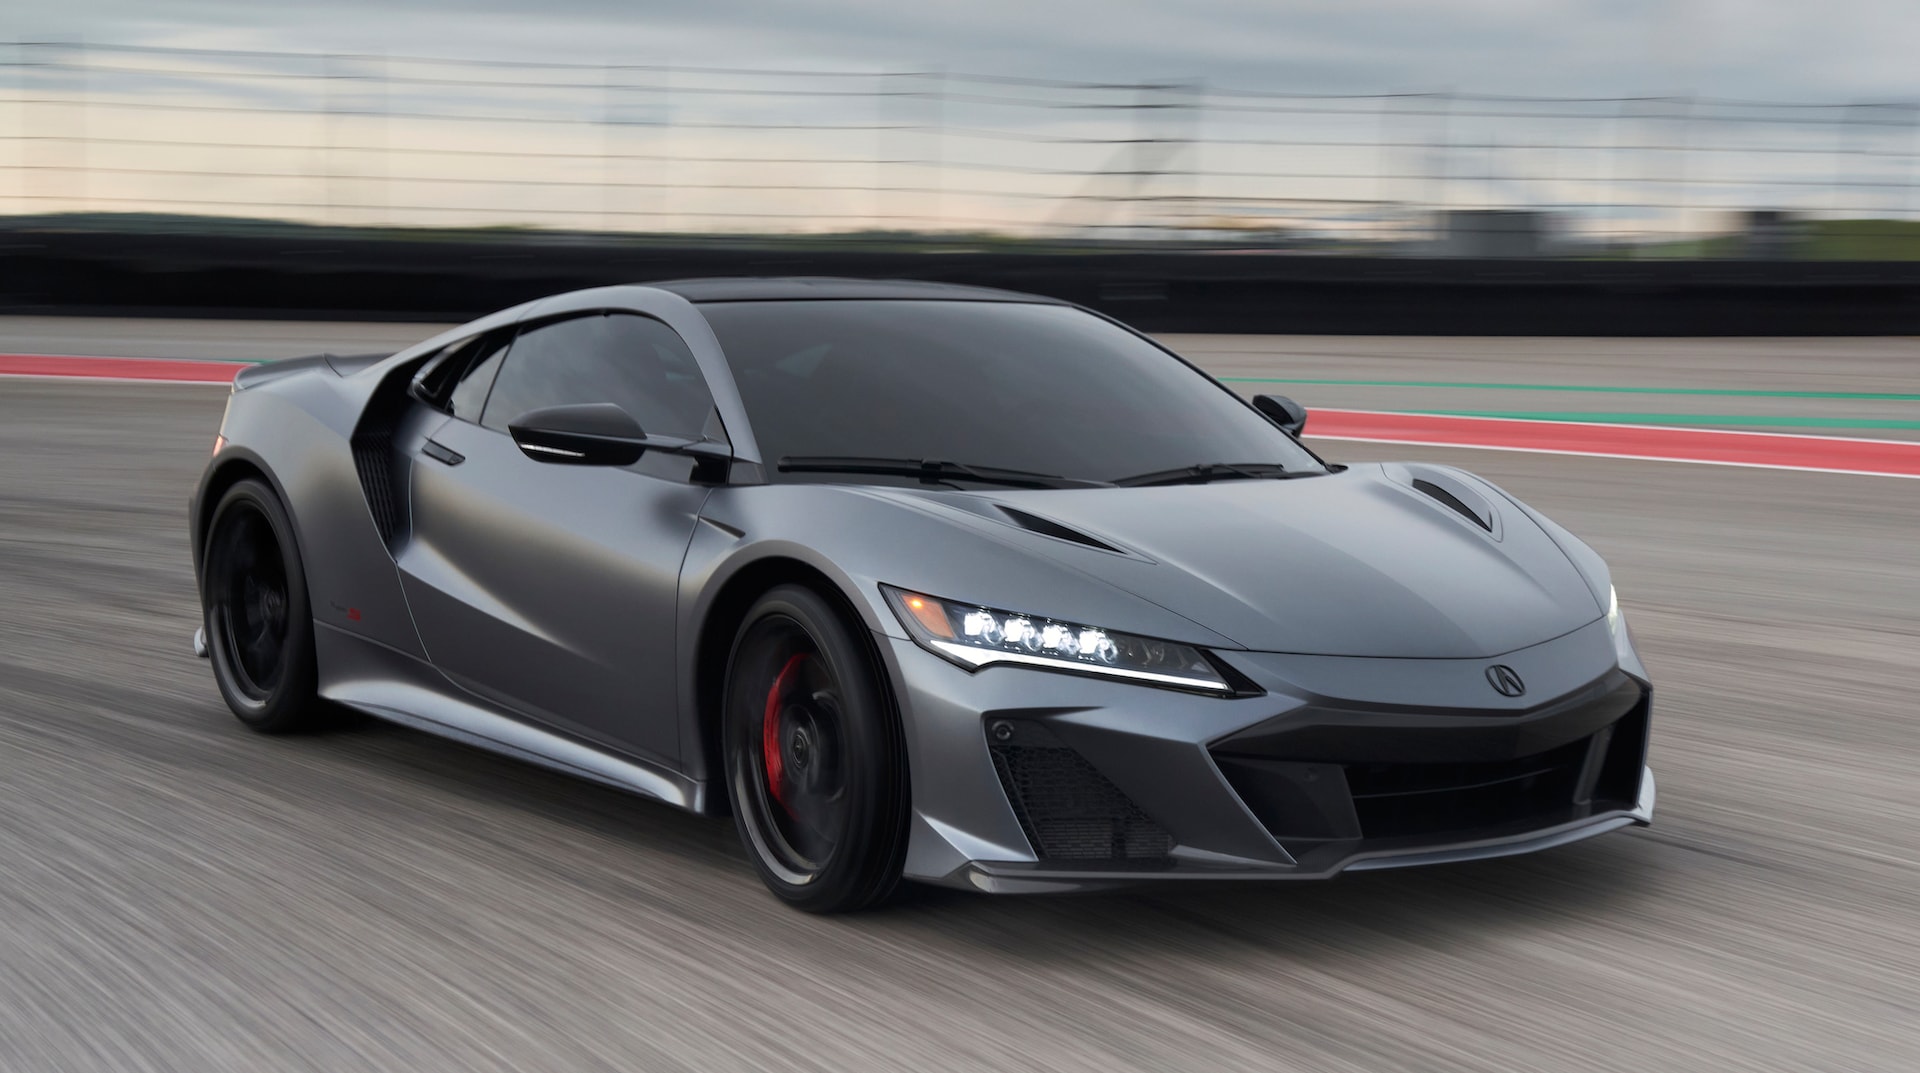 grey Acura NSX front angular view race track